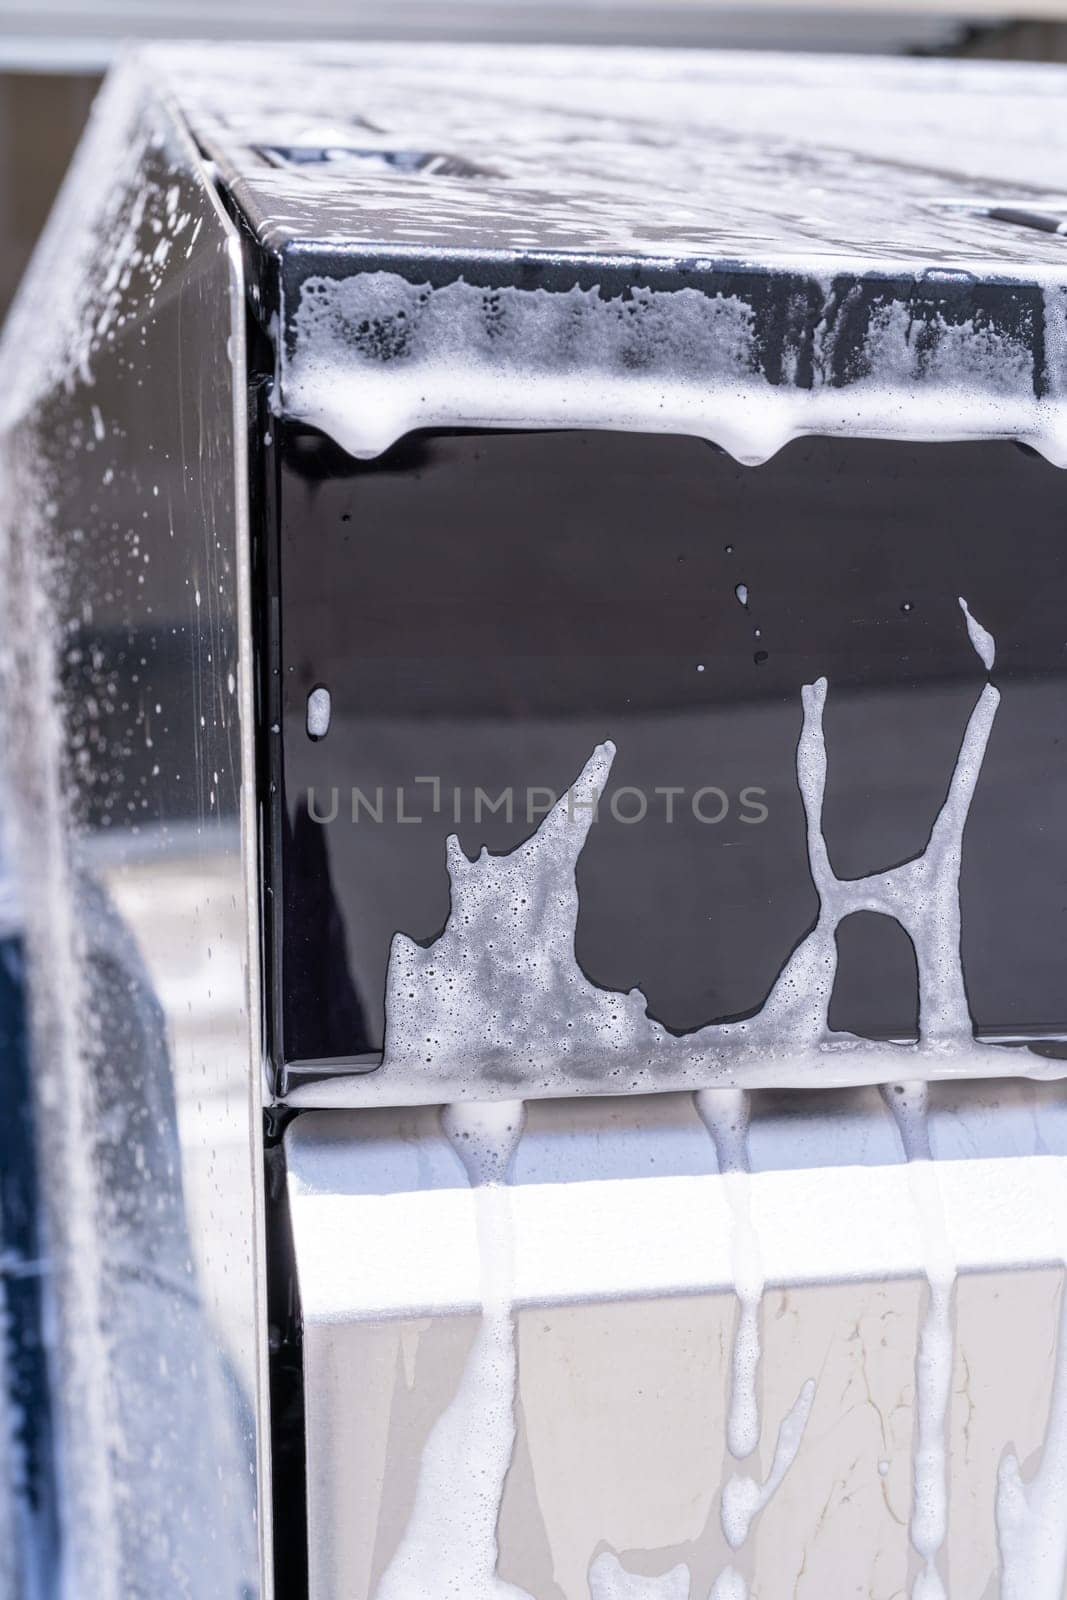 Denver, Colorado, USA-May 5, 2024-This image captures a detailed view of soap suds accumulating and dripping off the edge of a Tesla Cybertruck window during a wash, highlighting the vehicle distinct, clean lines and reflective surfaces.